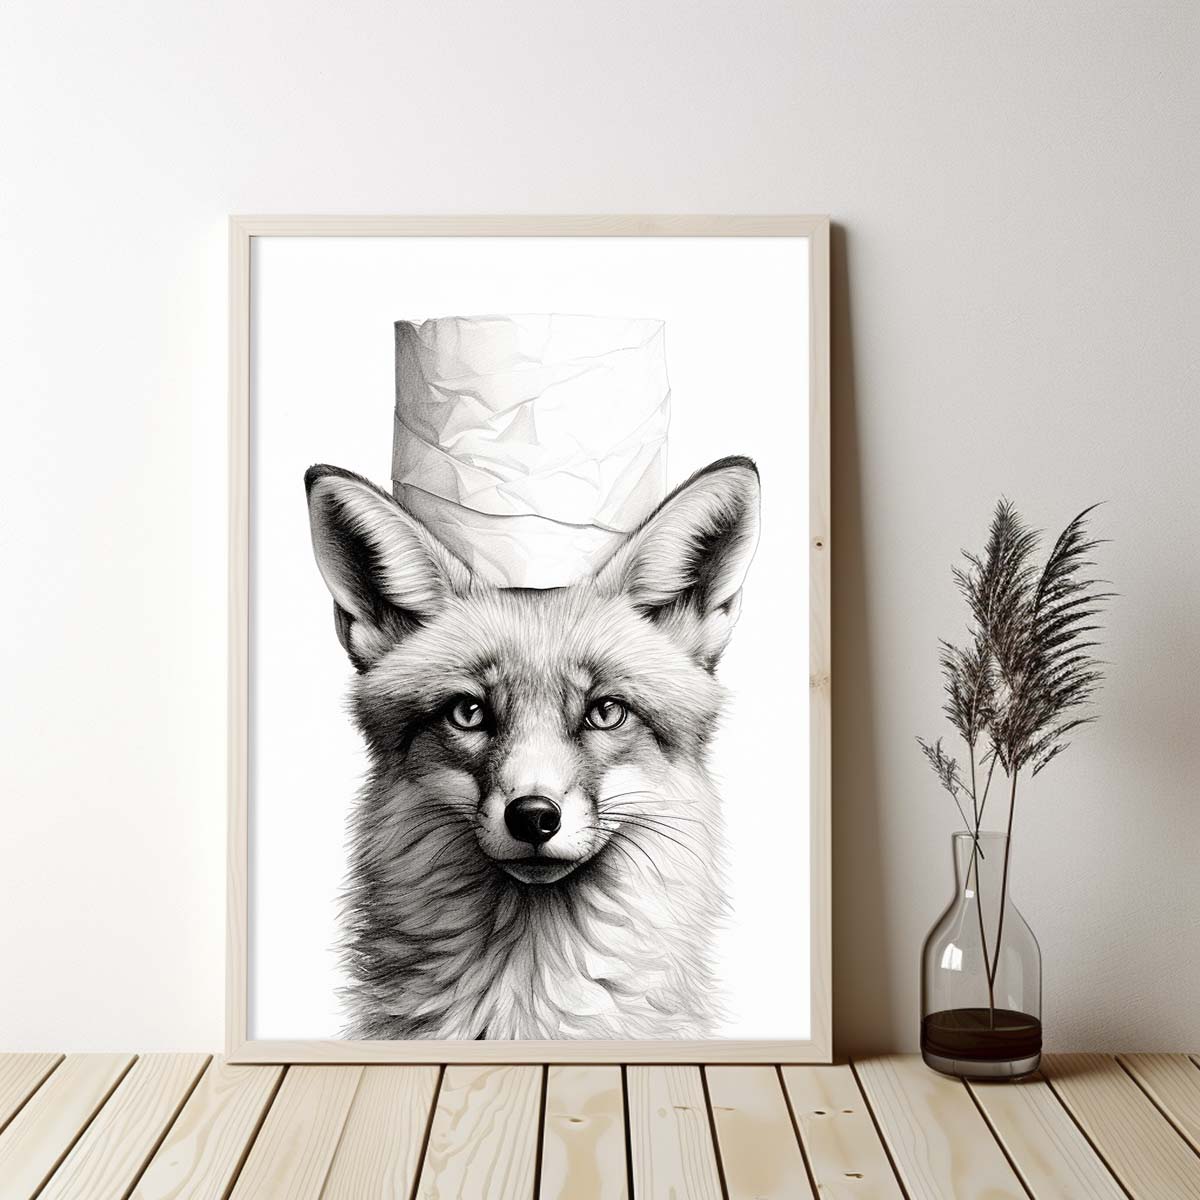 Fox With Toilet Paper Canvas Art, Fox With Toilet Paper, Funny Fox Art, Bathroom Wall Decor, Home Decor, Bathroom Wall Art, Animal Wall Decor, Animal Decor, Animal Gift